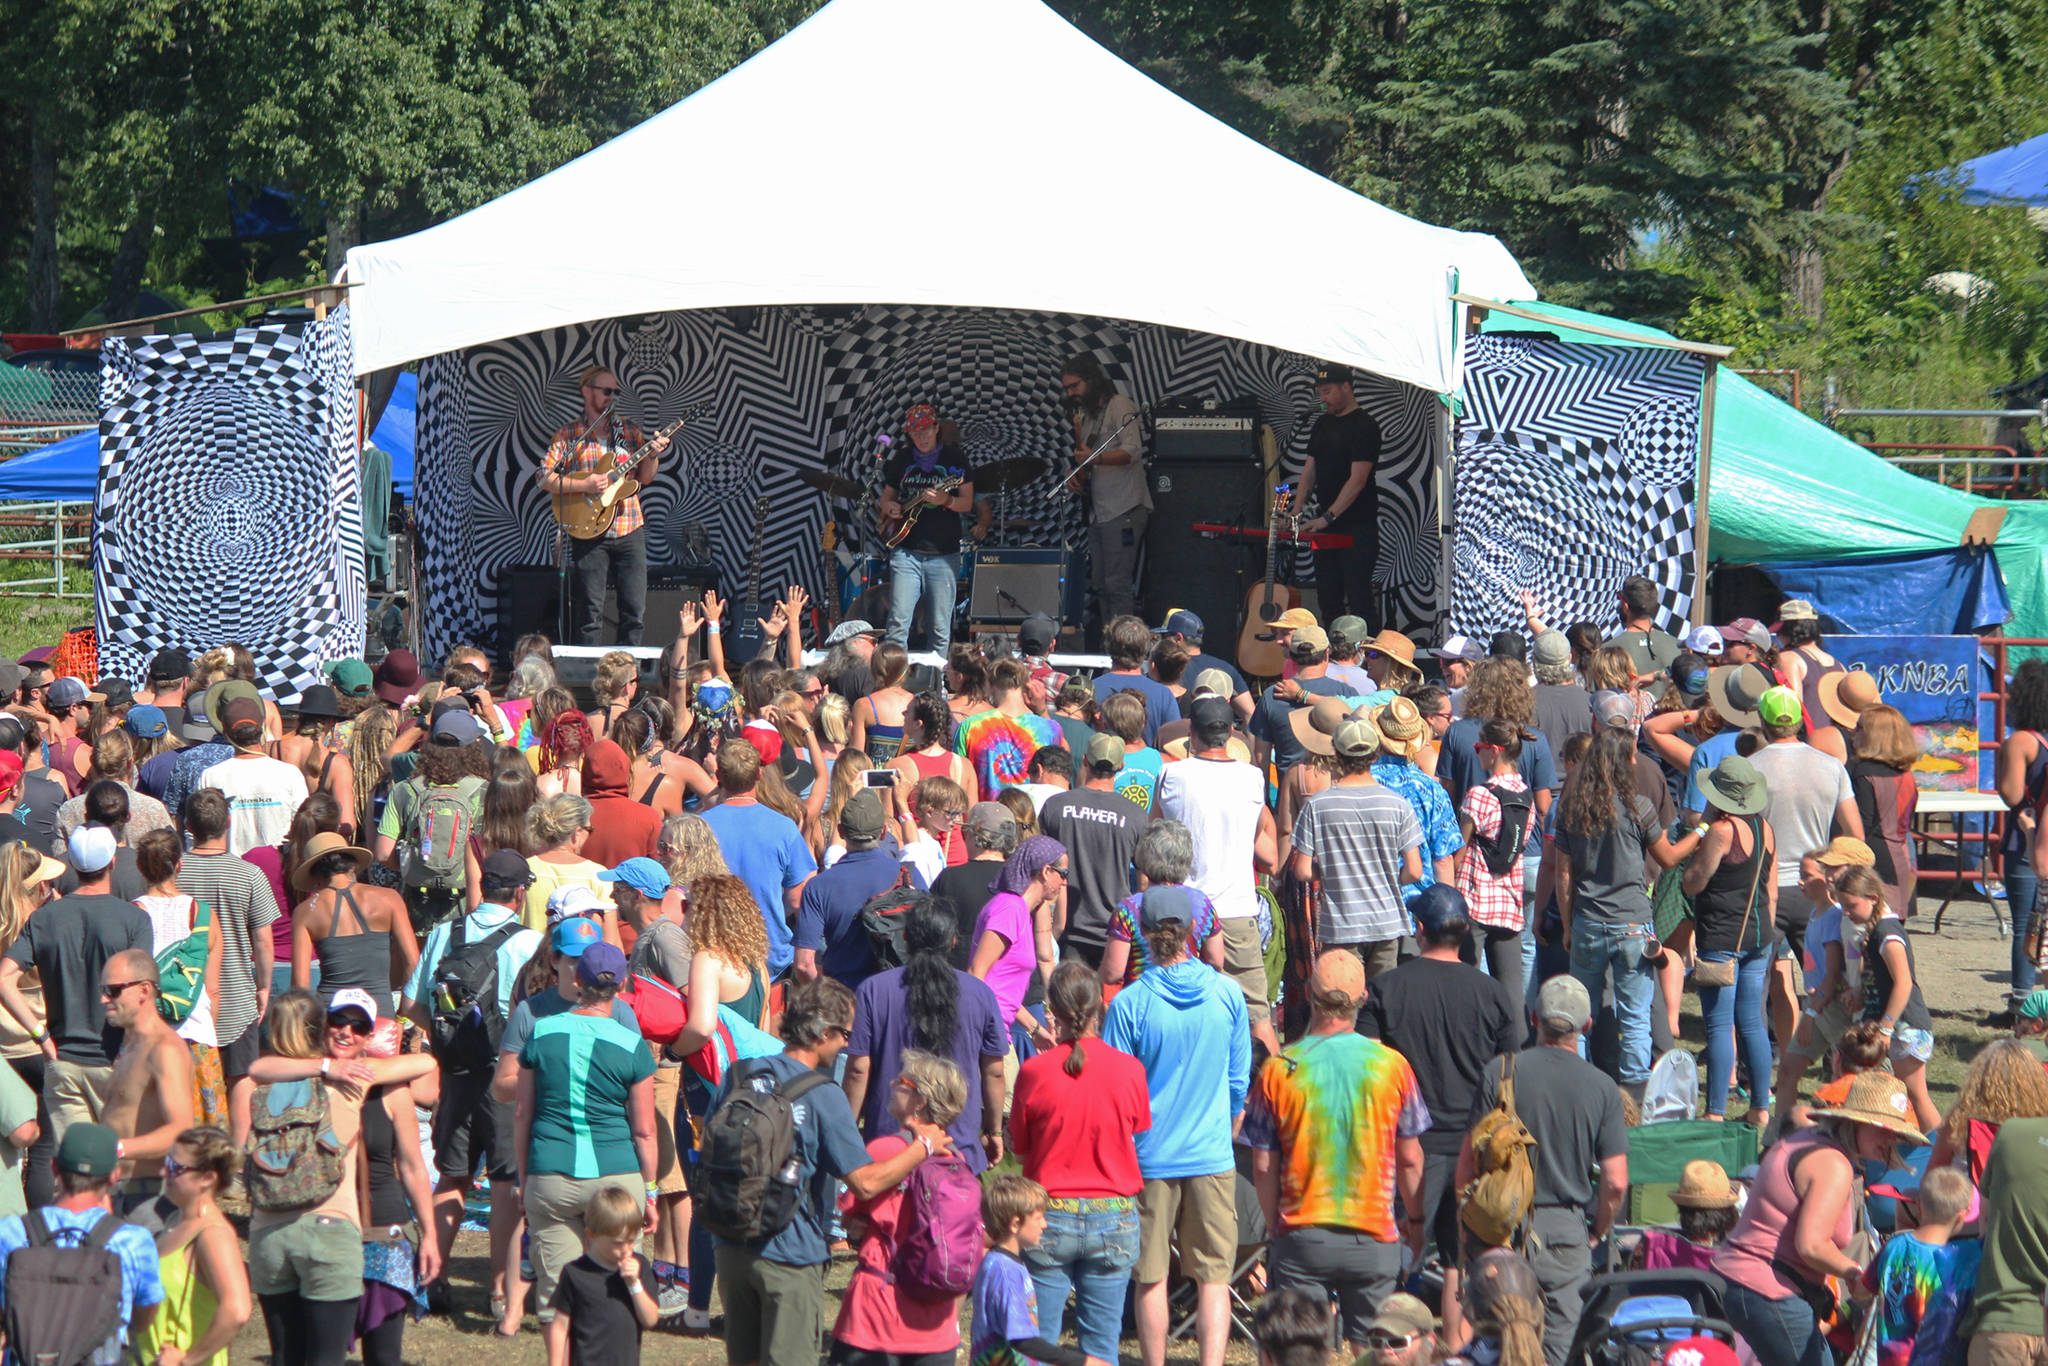 Music lovers listen to a performance on the River Stage at Salmonfest on Saturday, Aug. 4, 2018 in Ninilchik, Alaska. (Photo by Megan Pacer/Homer News)